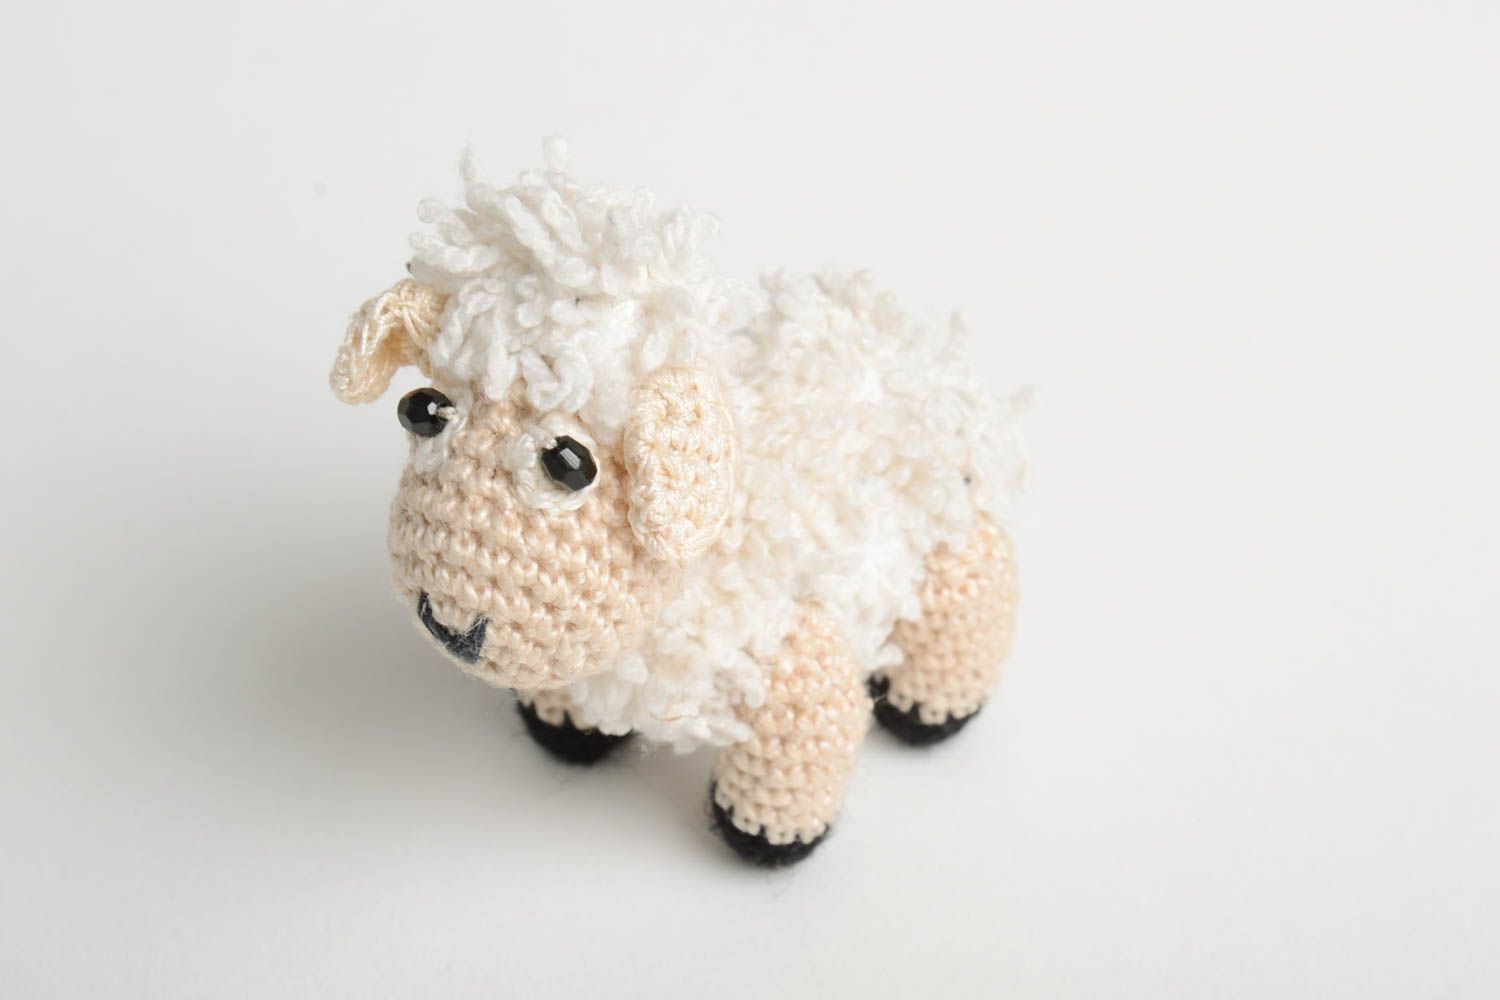 Handmade toy designer toy decor ideas crocheted toy gift for baby animal toy photo 4